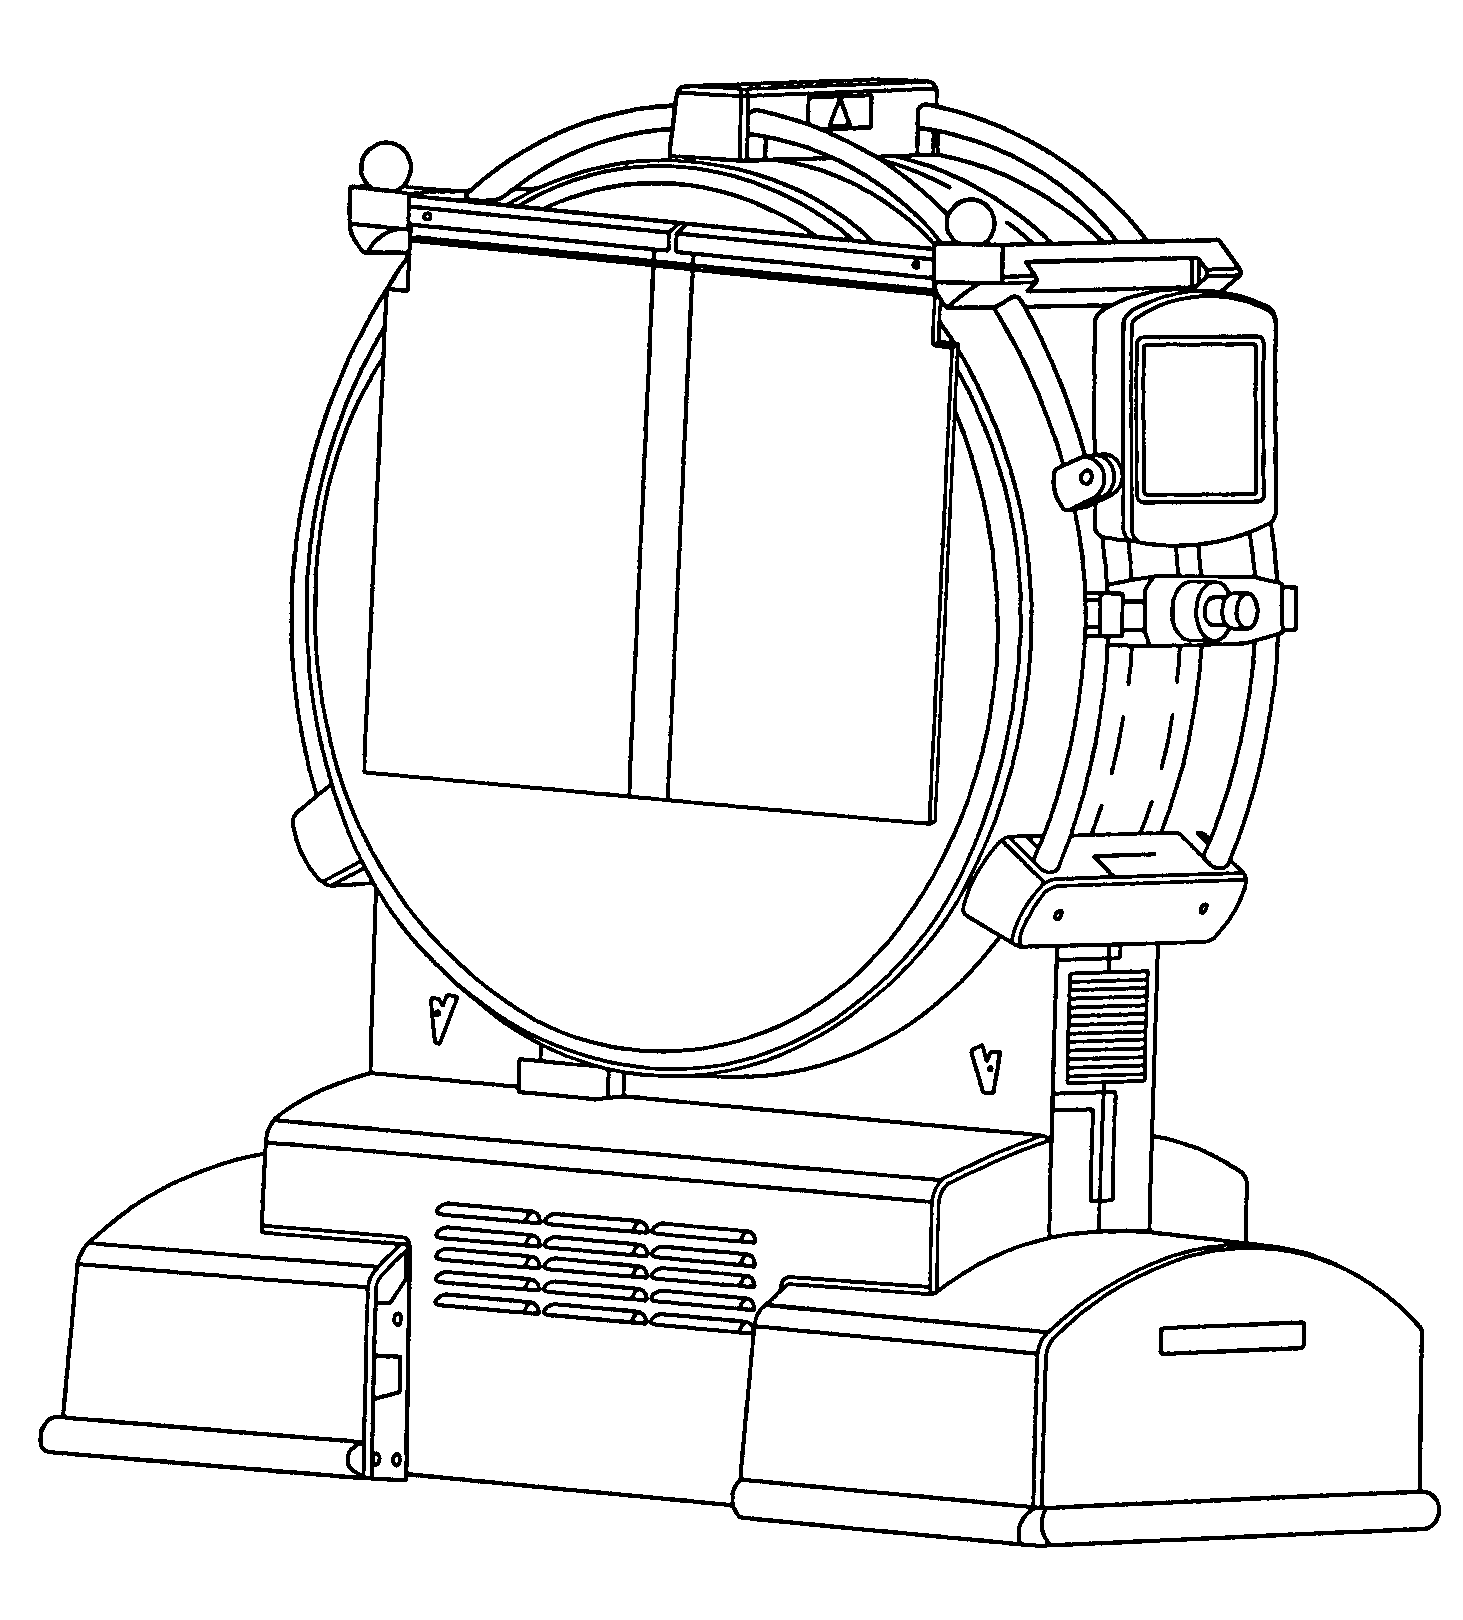 Transportable anatomical imaging system with radiation-protective curtains